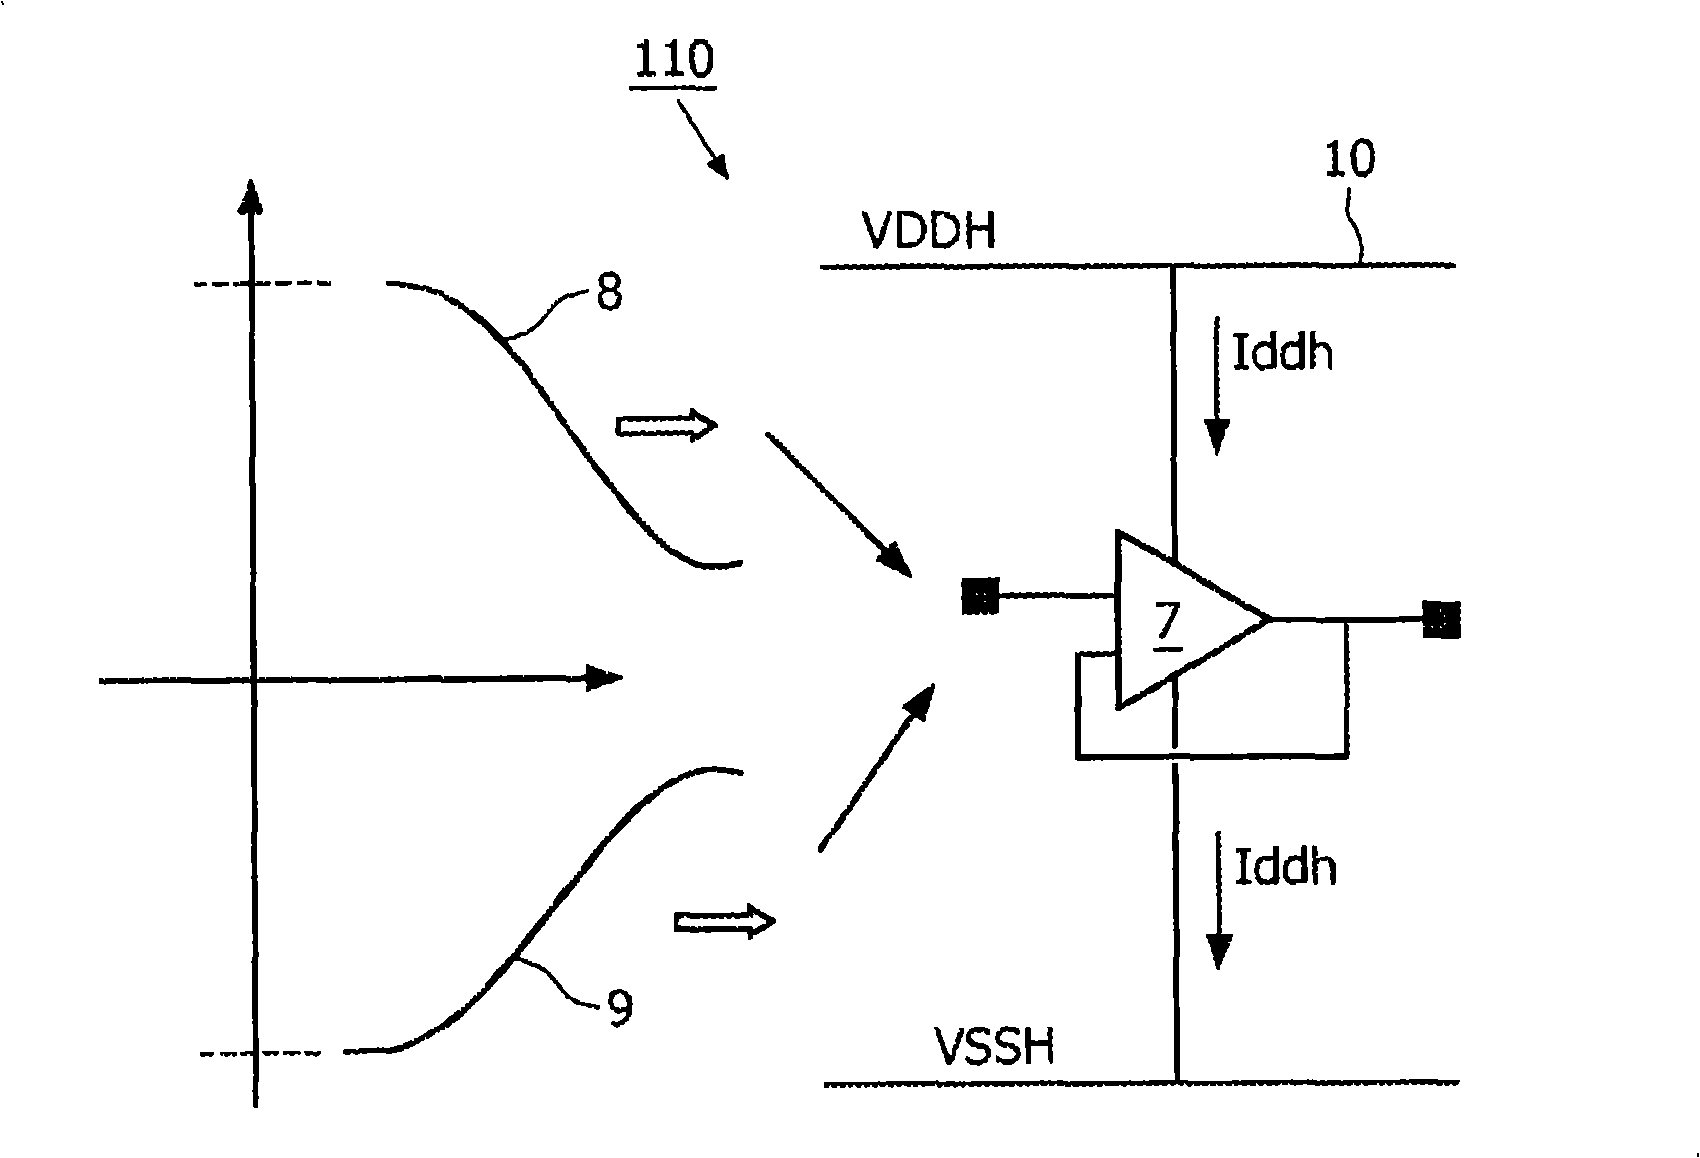 Apparatus for driving an LCD display with reduced power consumption